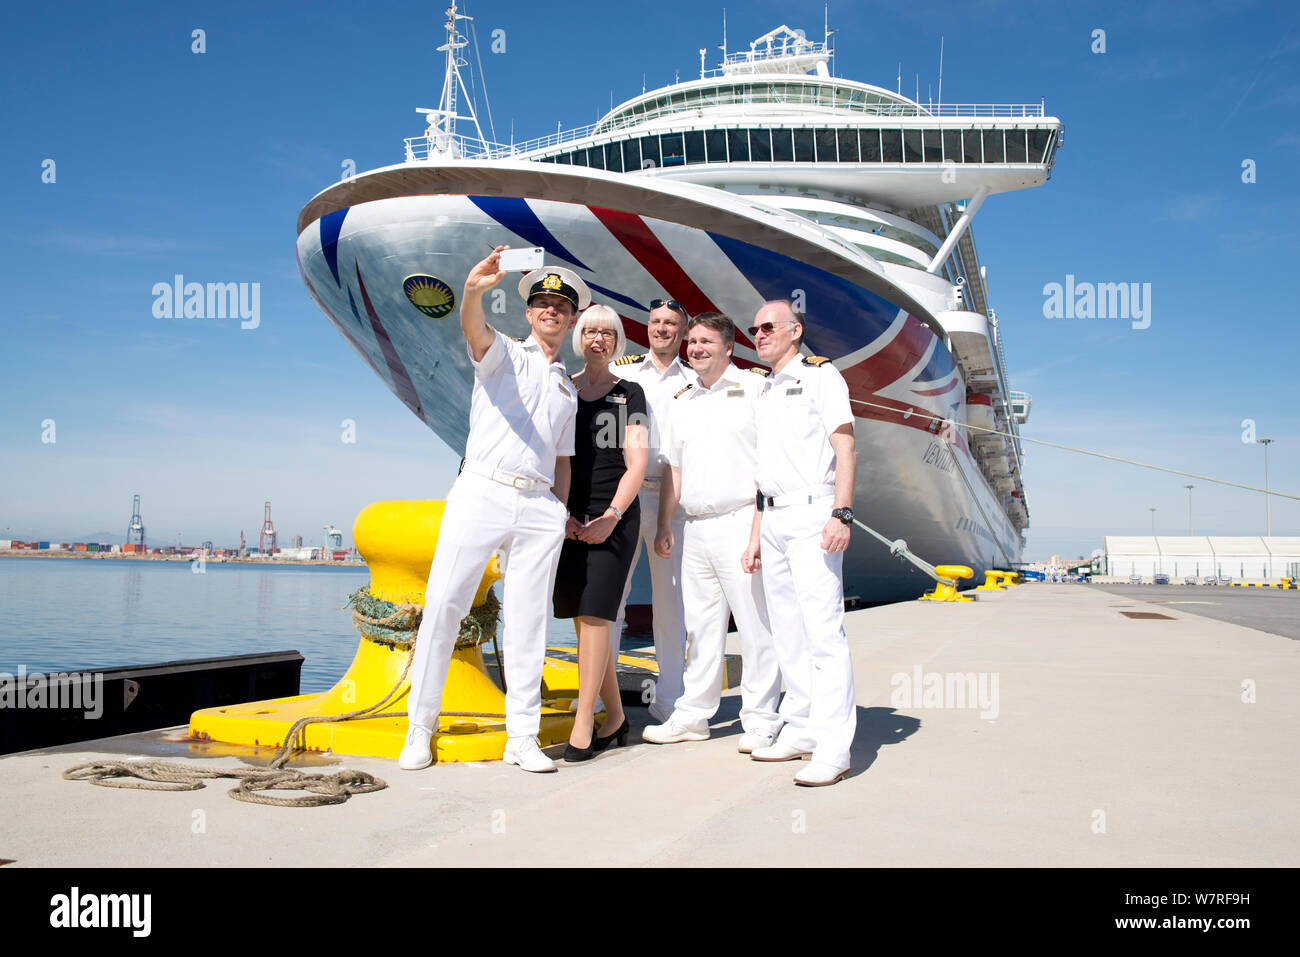 Photoshoot with senior management team of P&O Cruises ship mv Ventura showing officers and exterior view of cruise ship Stock Photo